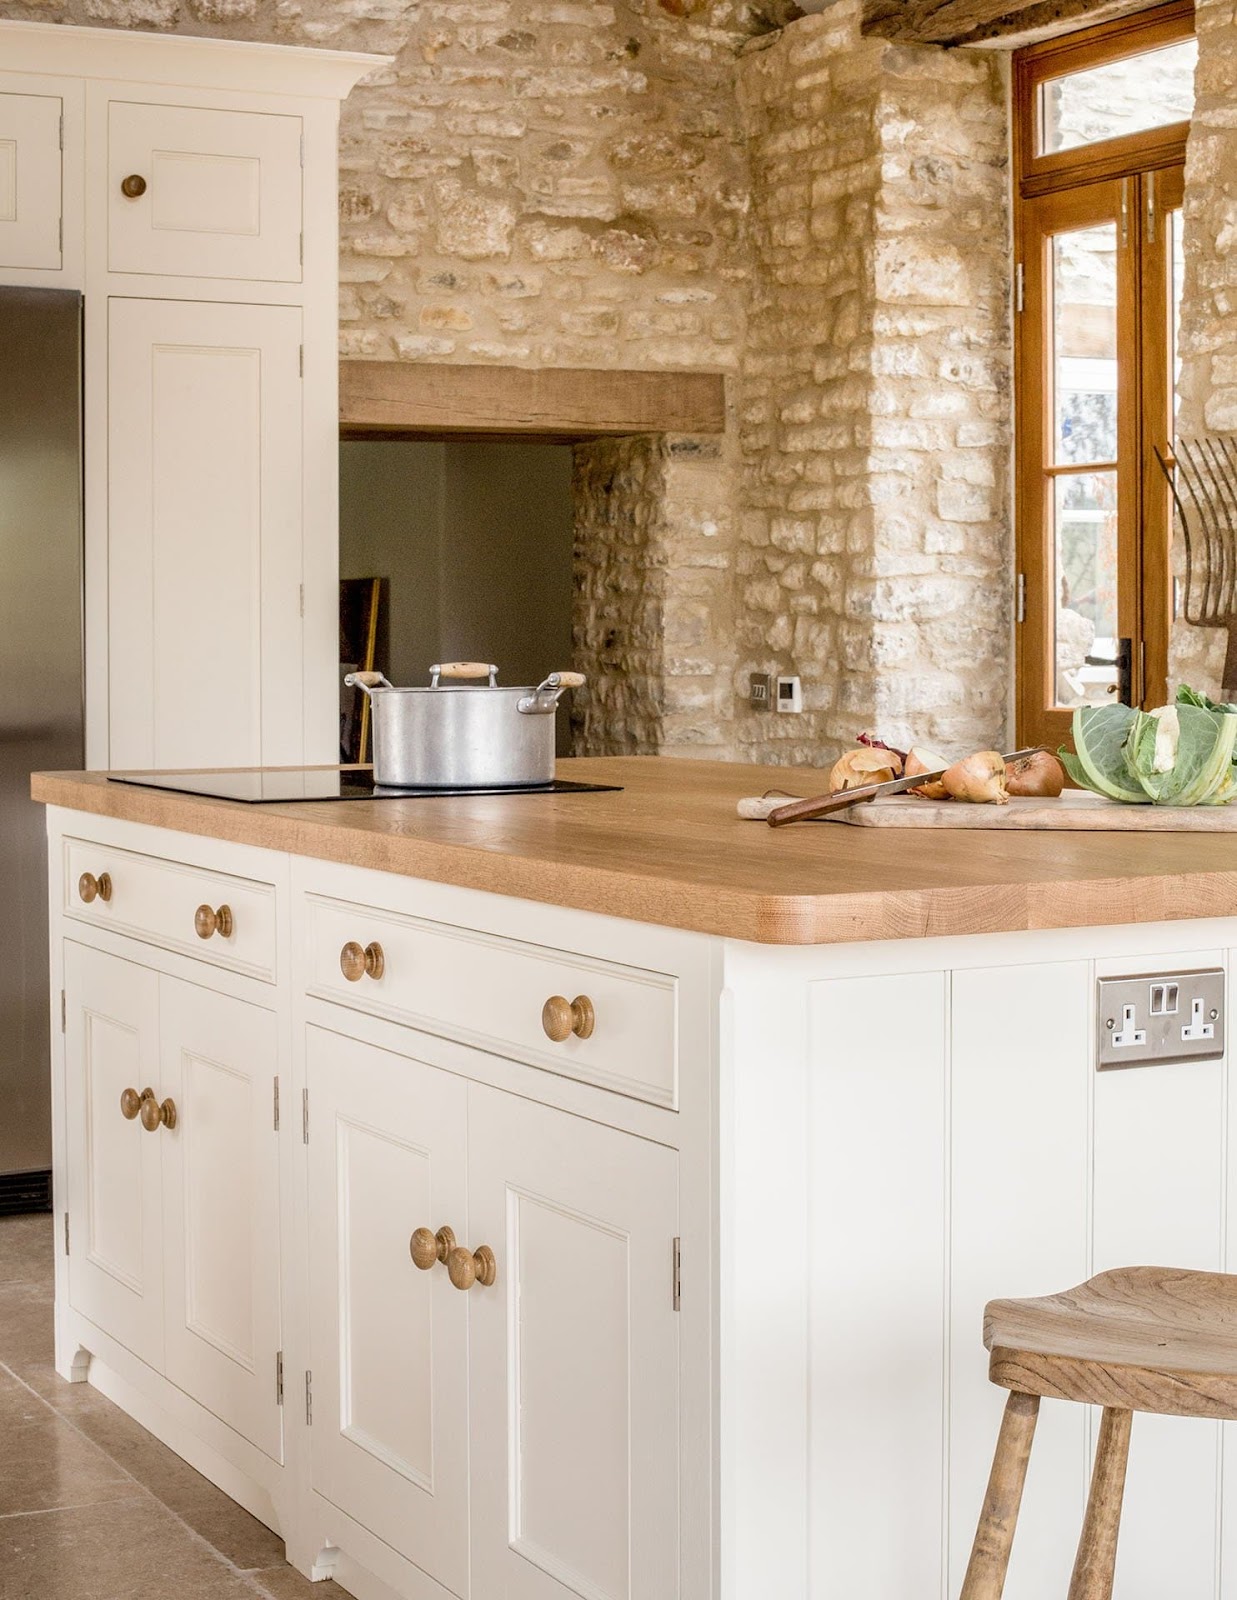 Barn conversion kitchen in Farrow and Ball Tallow